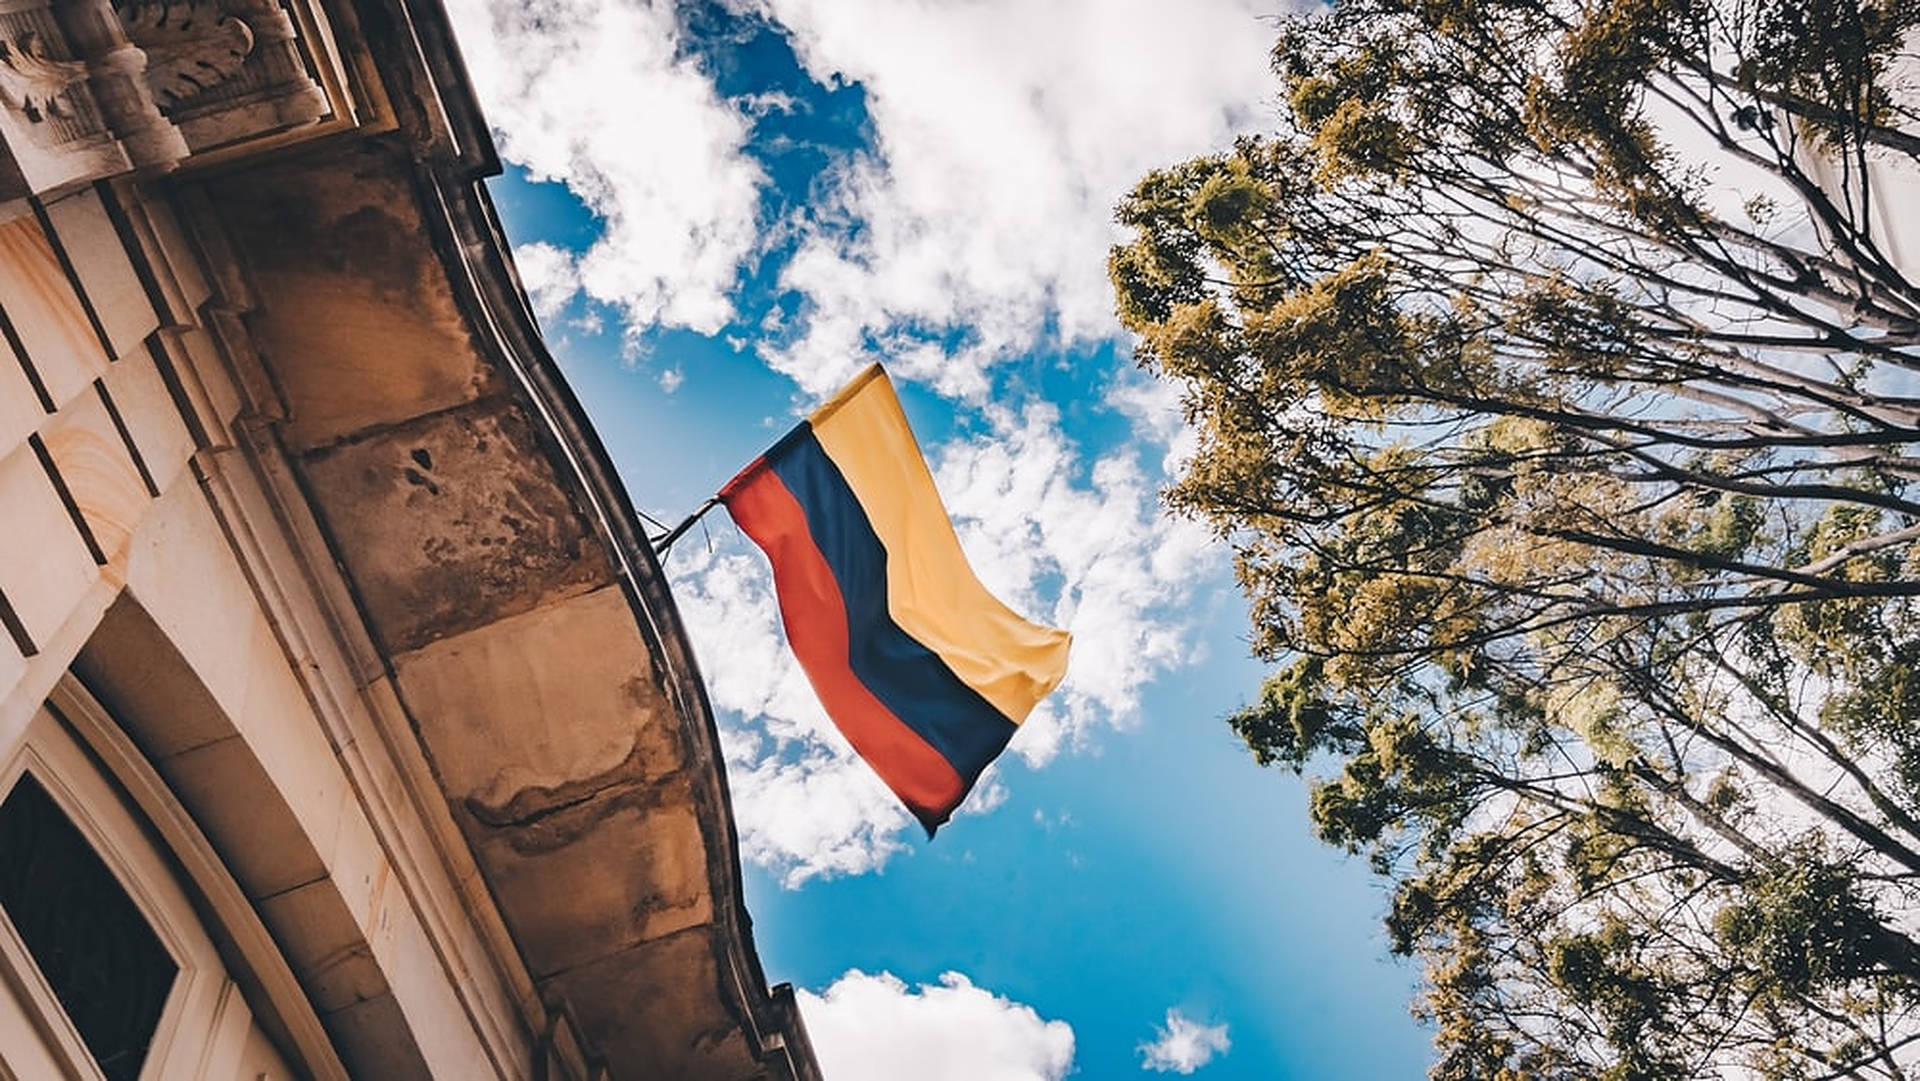 Cool Colombian Wallpapers